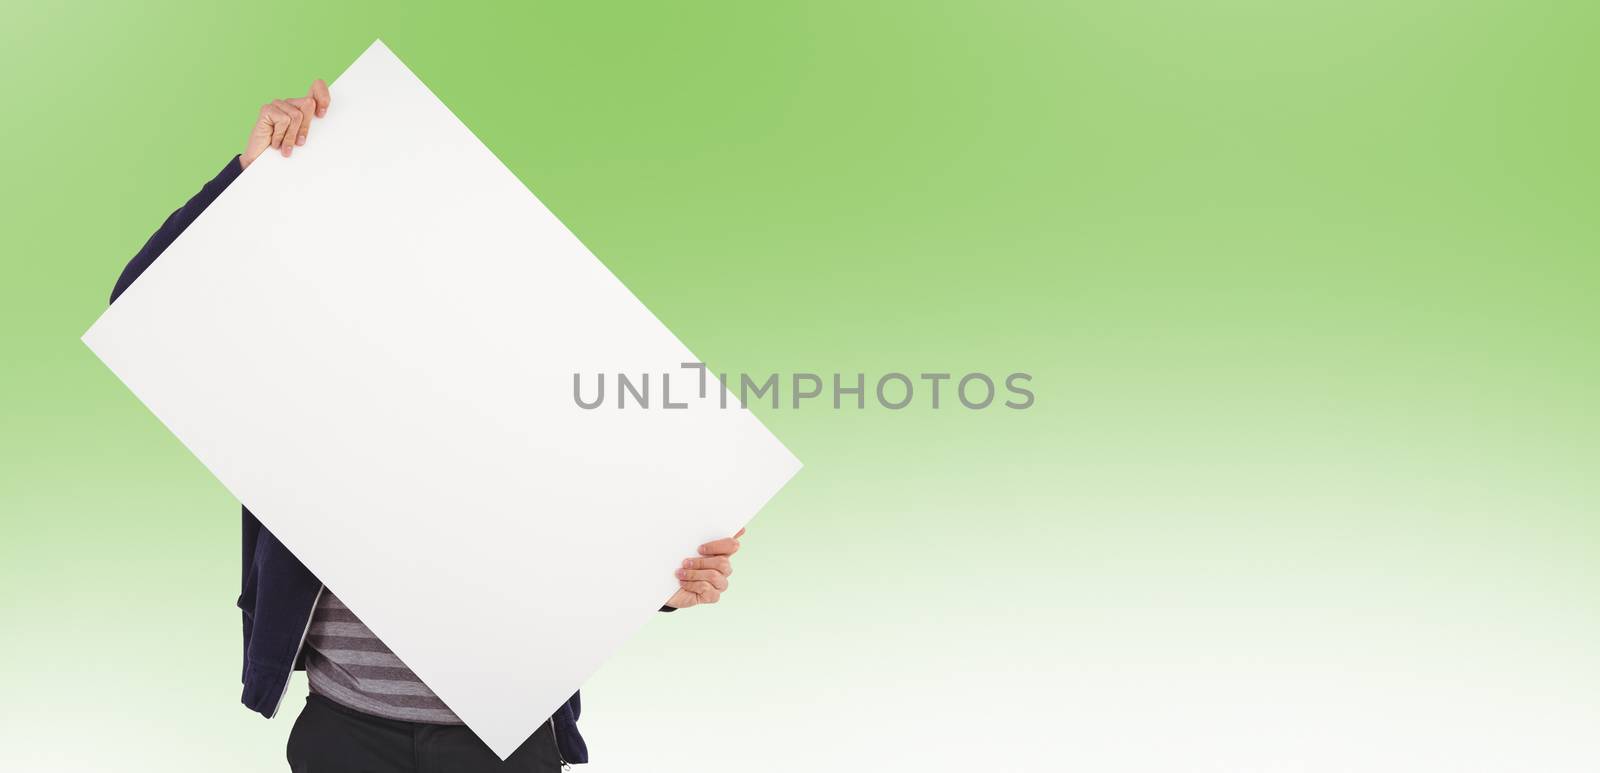 Man holding billboard in front of face against green background